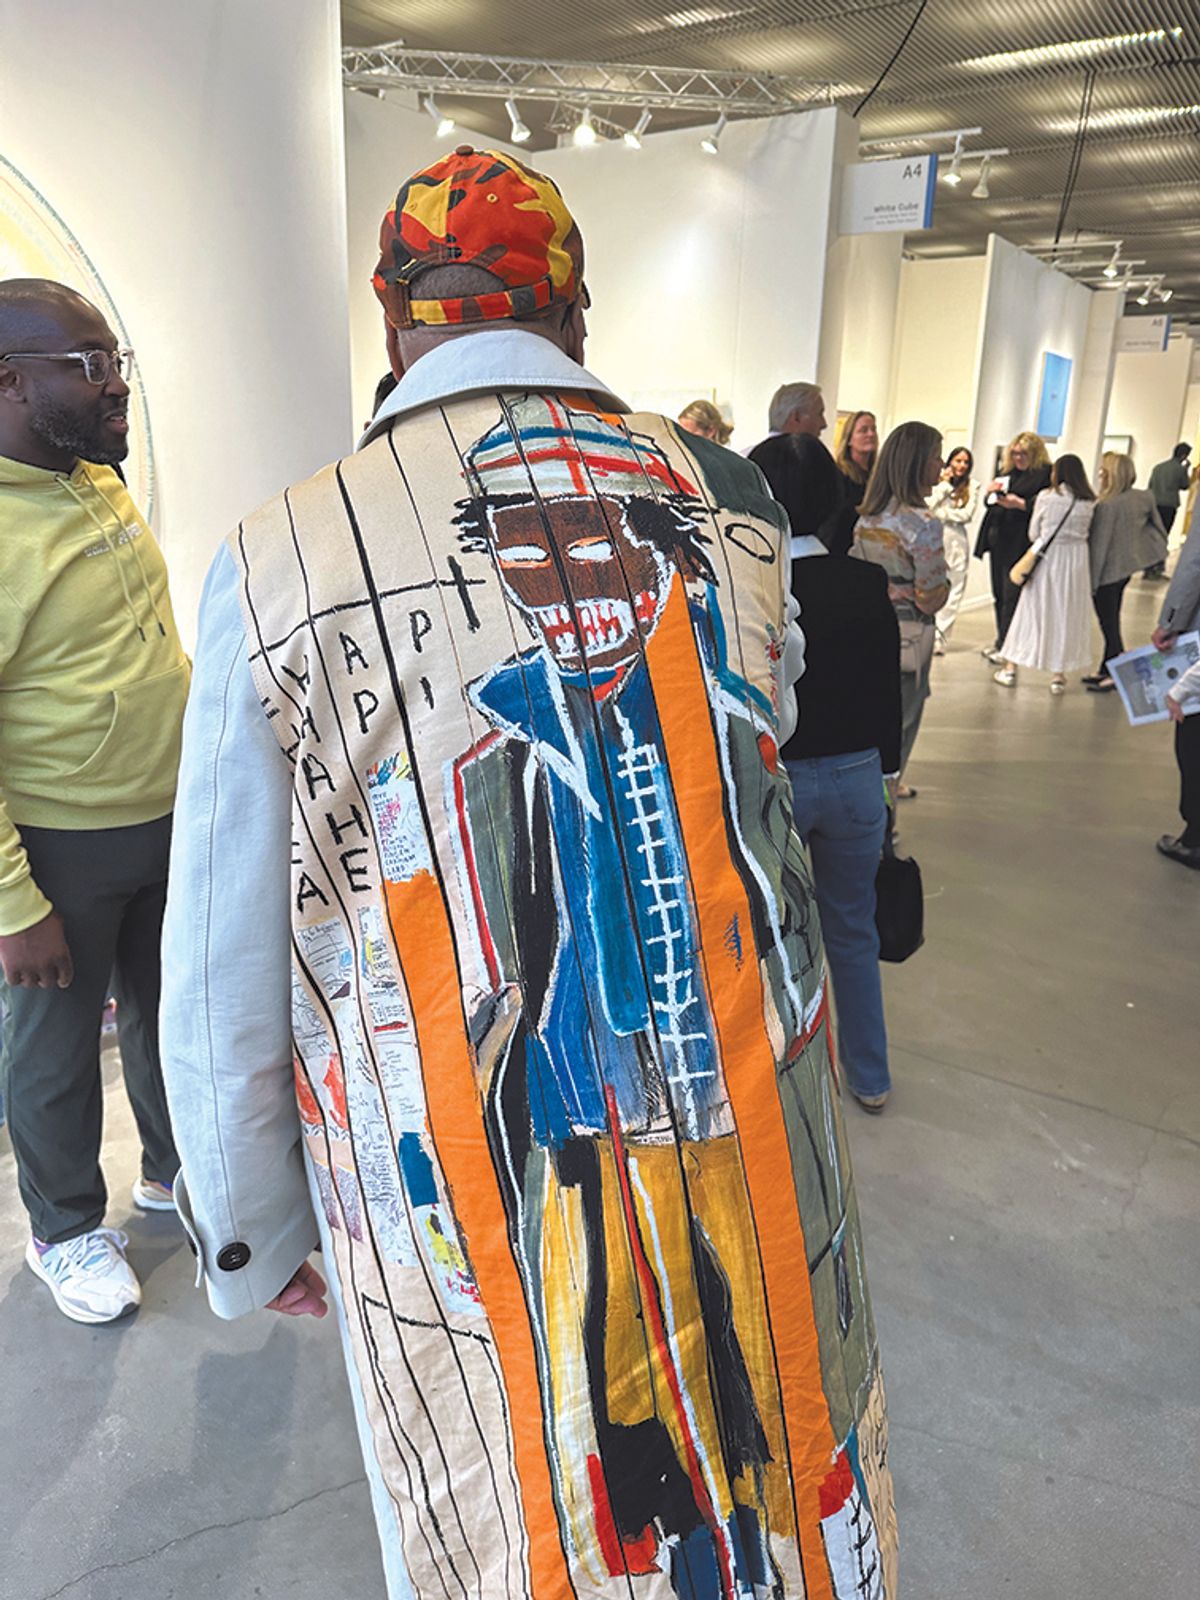 Collector Lyndon Barrois in his Basquiat-style coat among the stands at Frieze Photo: Gareth Harris